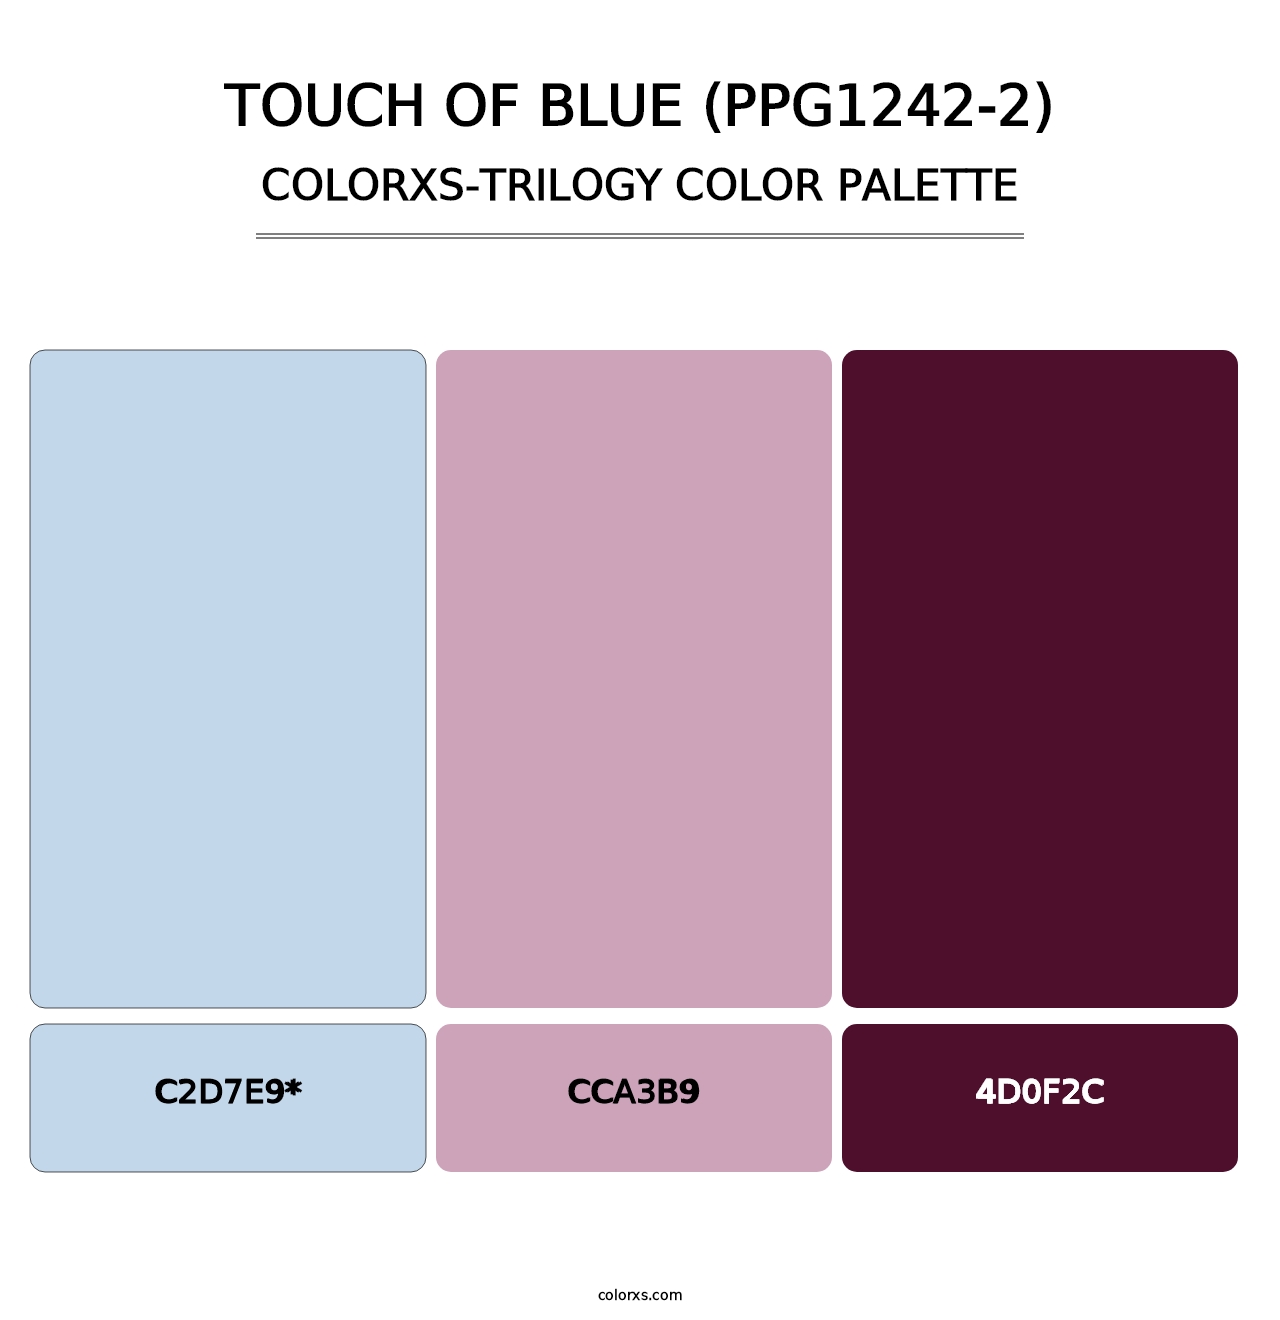 Touch Of Blue (PPG1242-2) - Colorxs Trilogy Palette